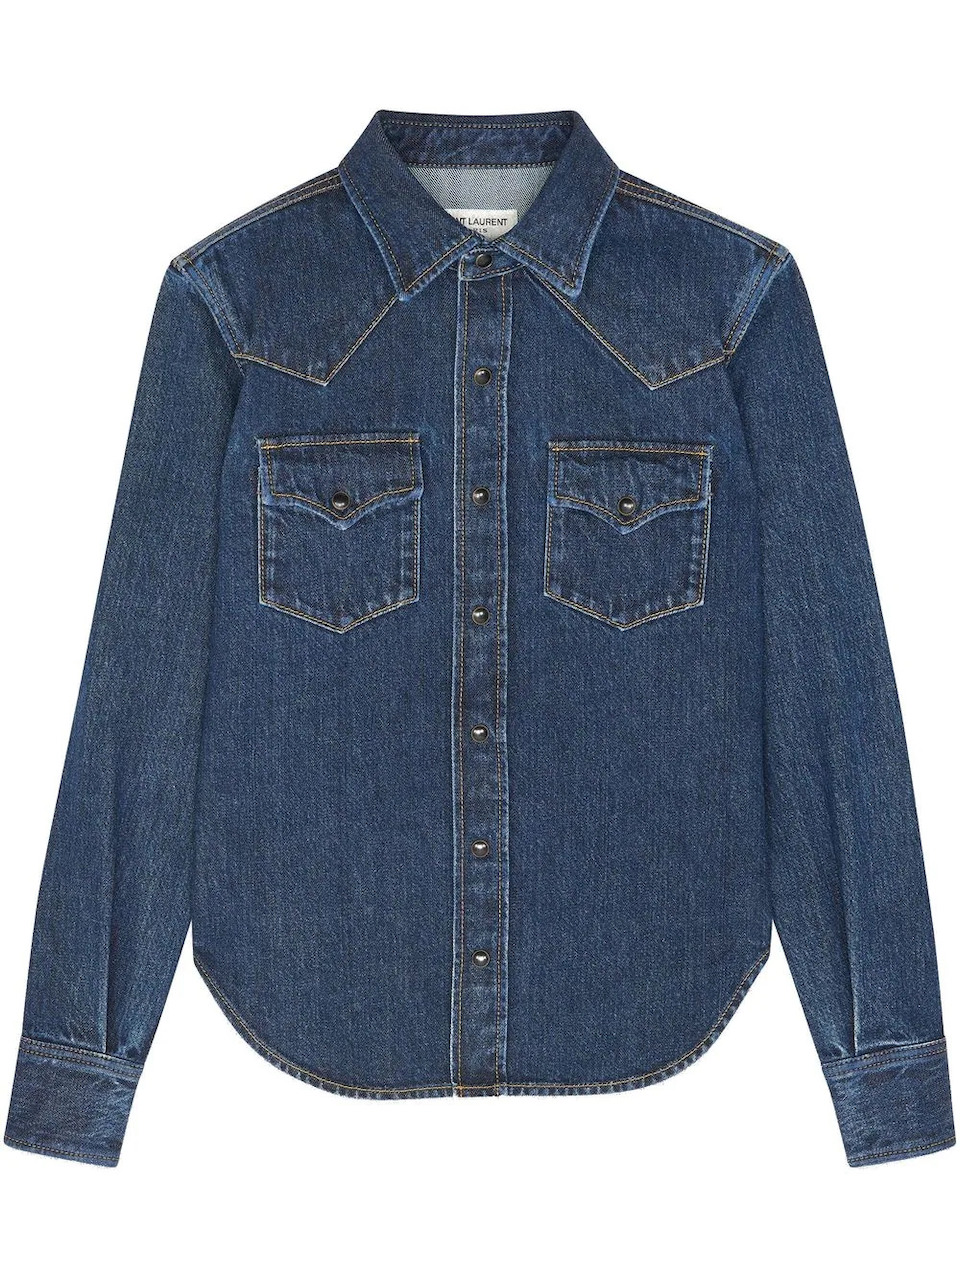 Best Denim Shirts for a Canadian Tuxedo Outfit